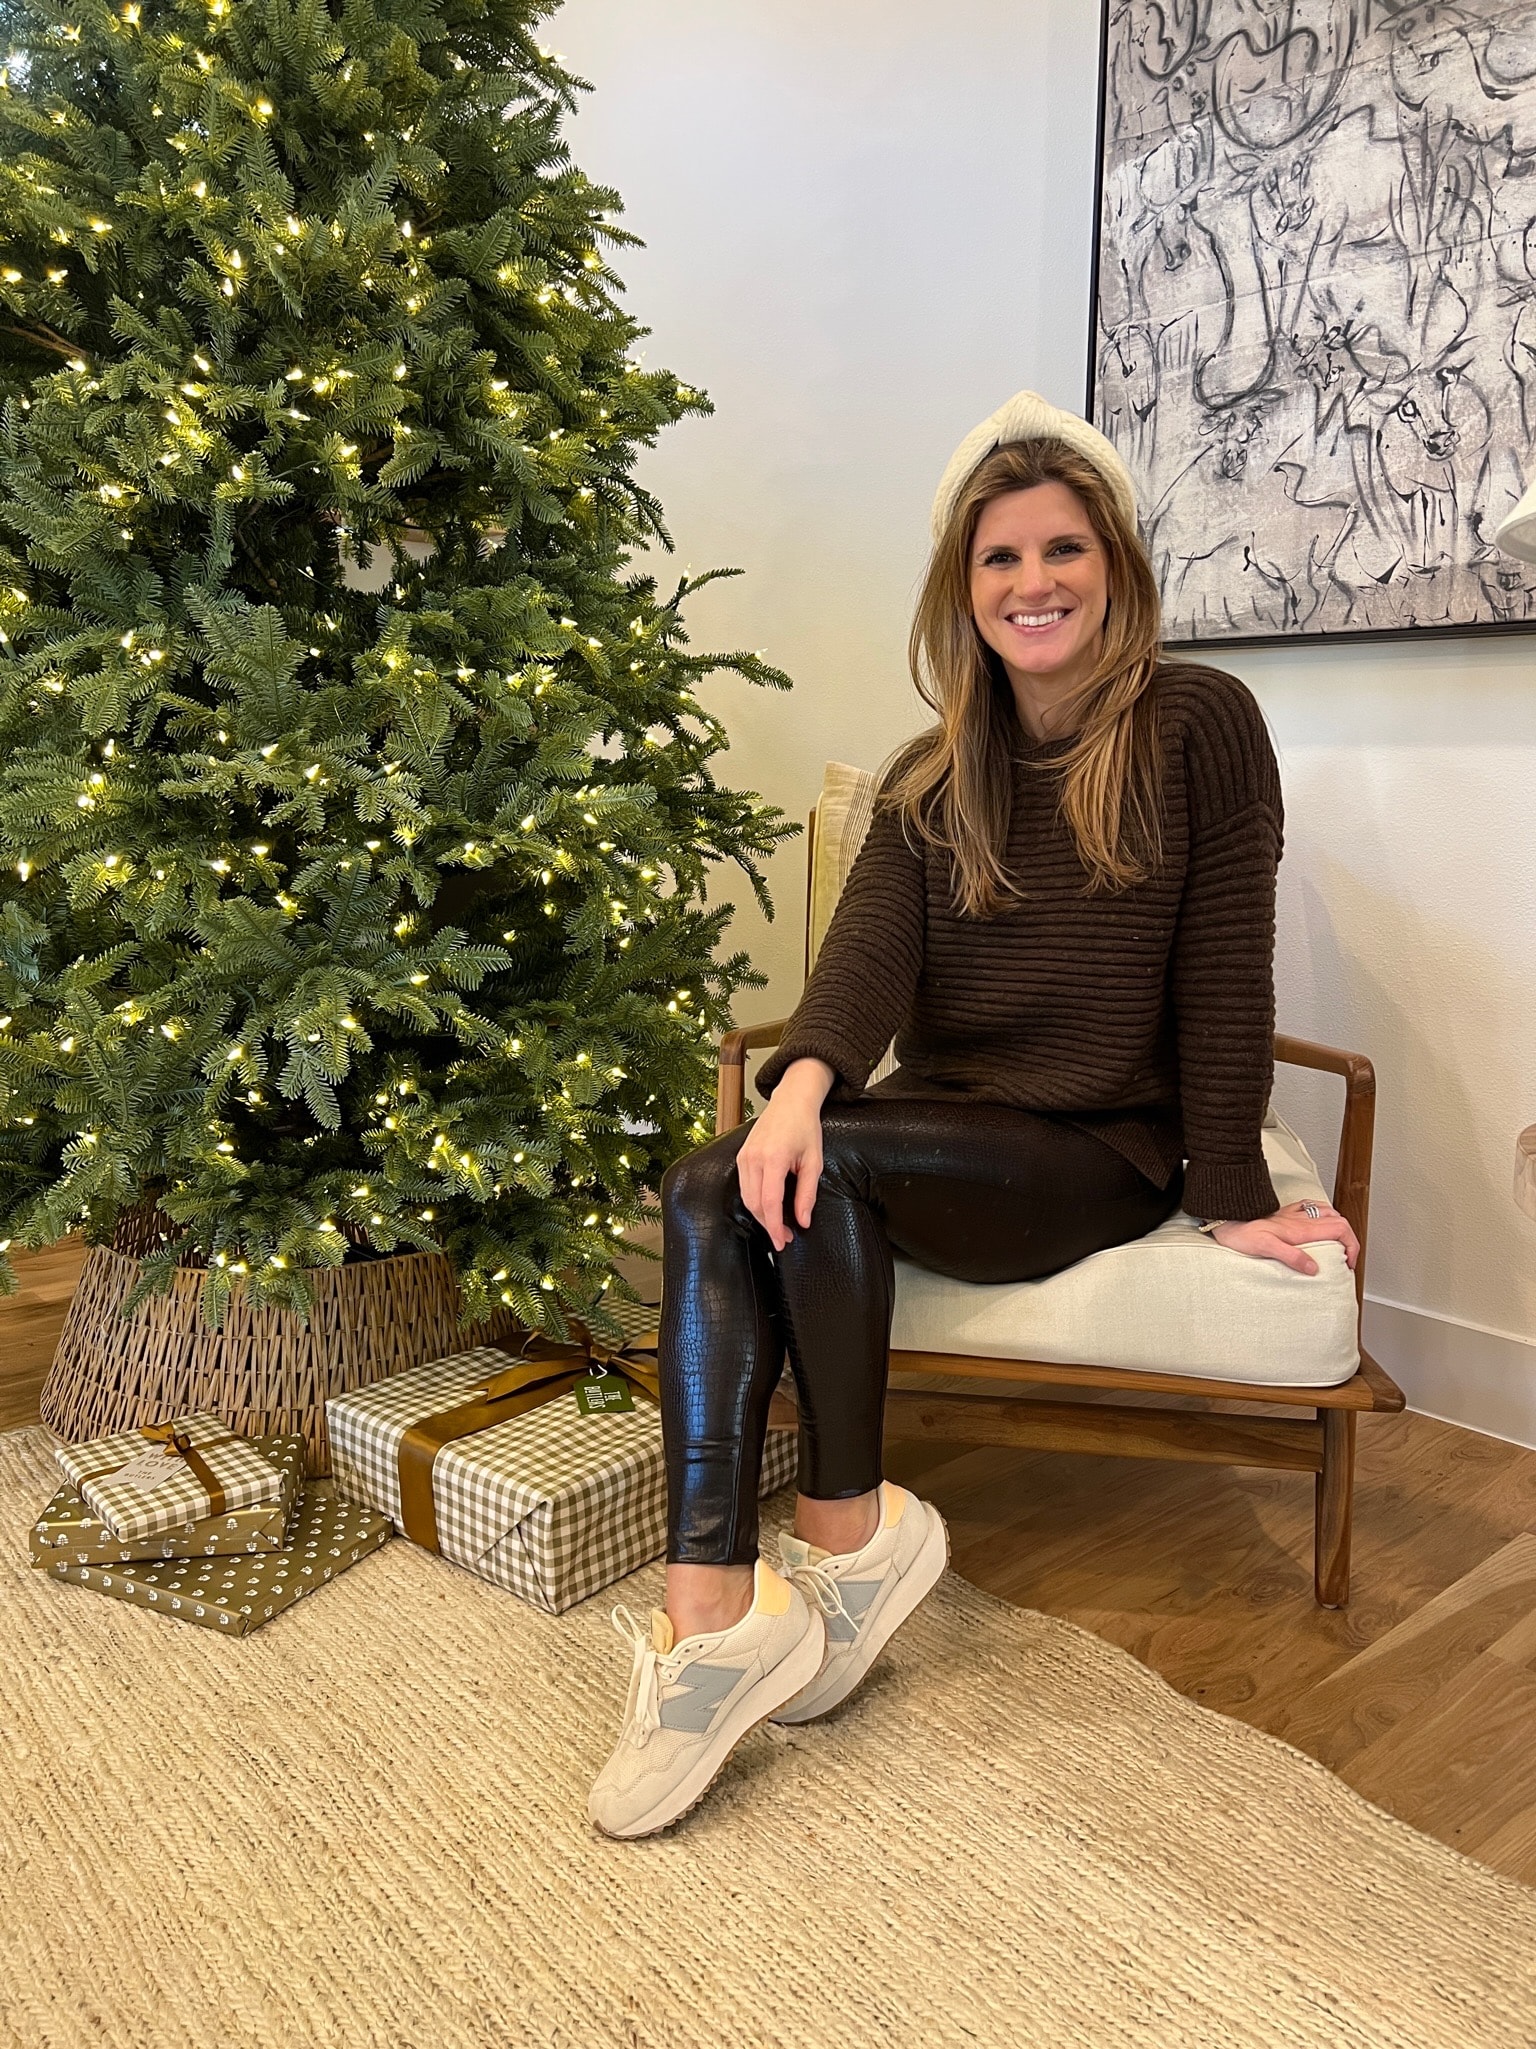 Brighton Butler in striped sweater, leather leggings and sneakers by Christmas tree